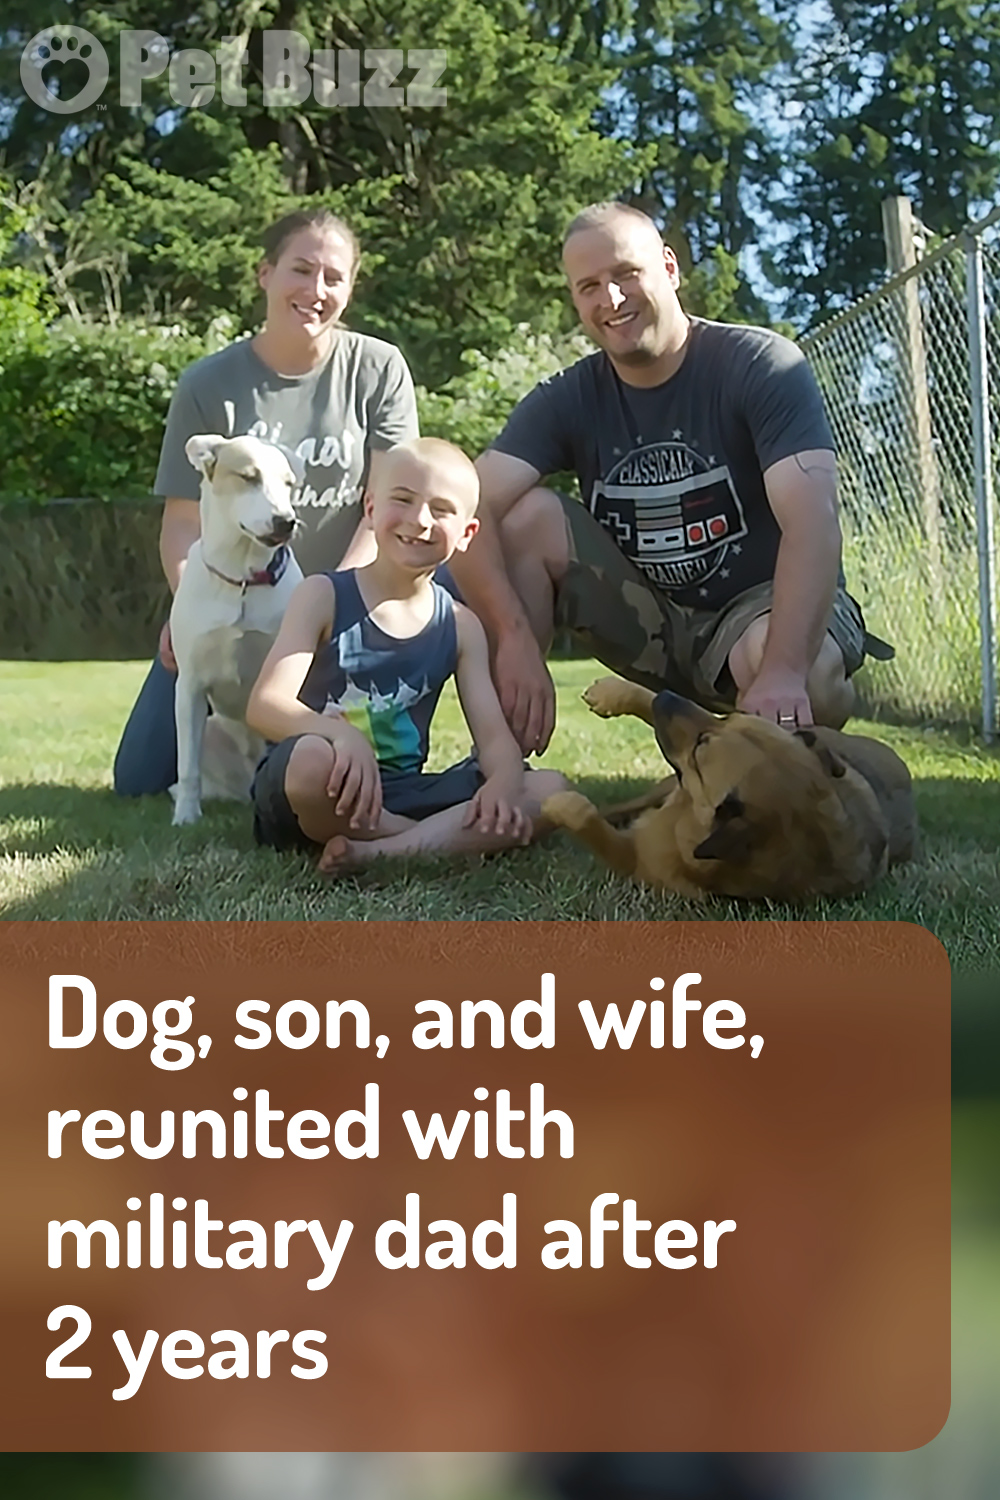 Dog, son, and wife, reunited with military dad after 2 years